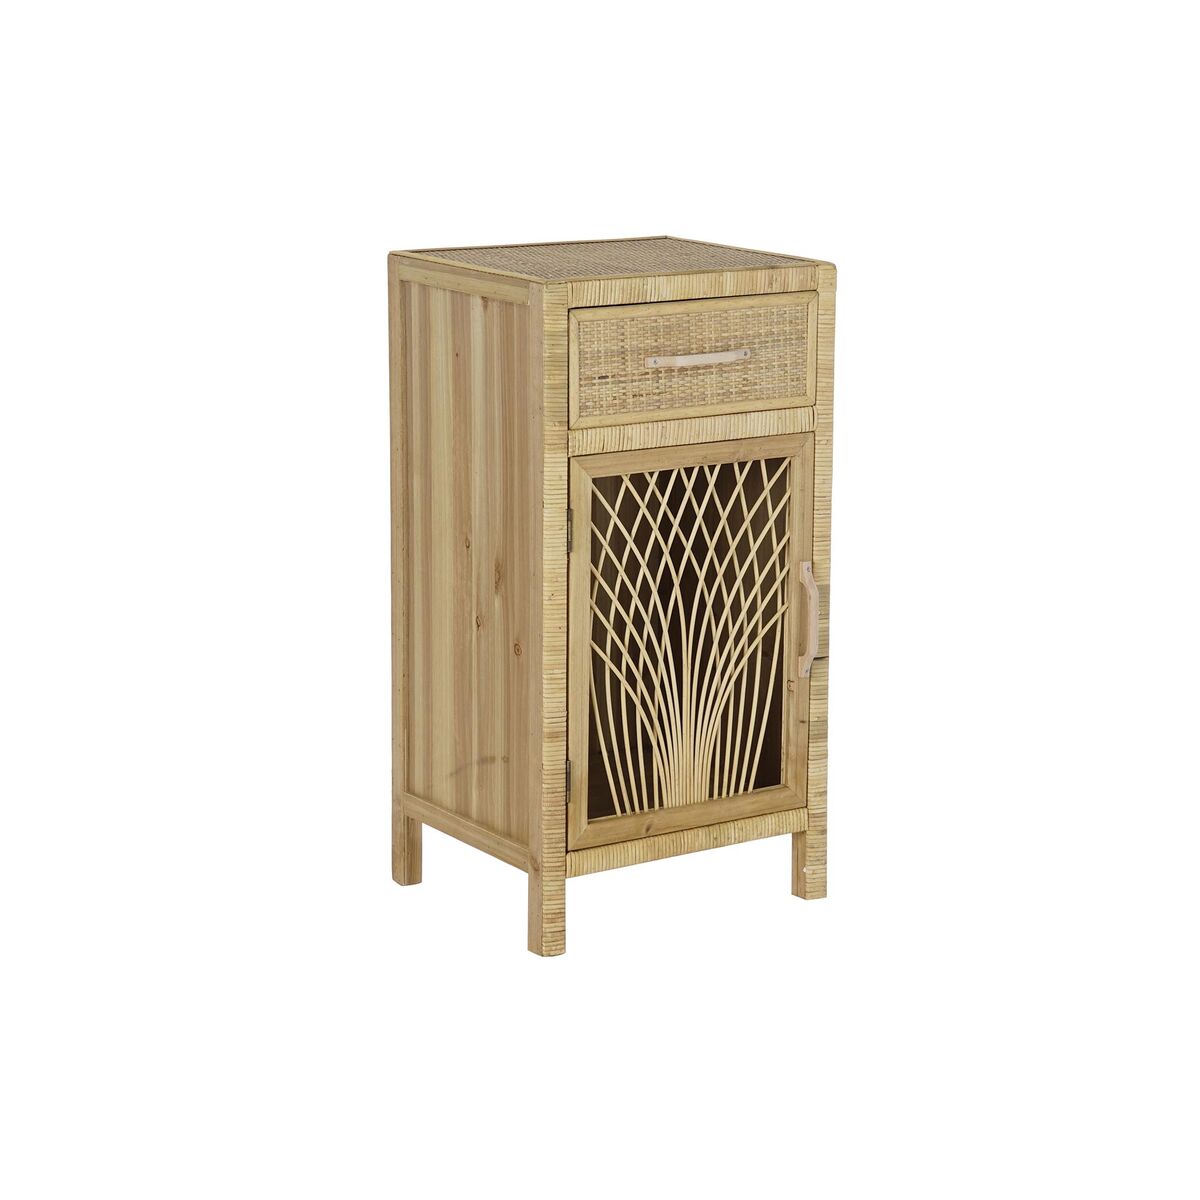 Bedside Table in Rattan (42 x 35 x 80 cm)